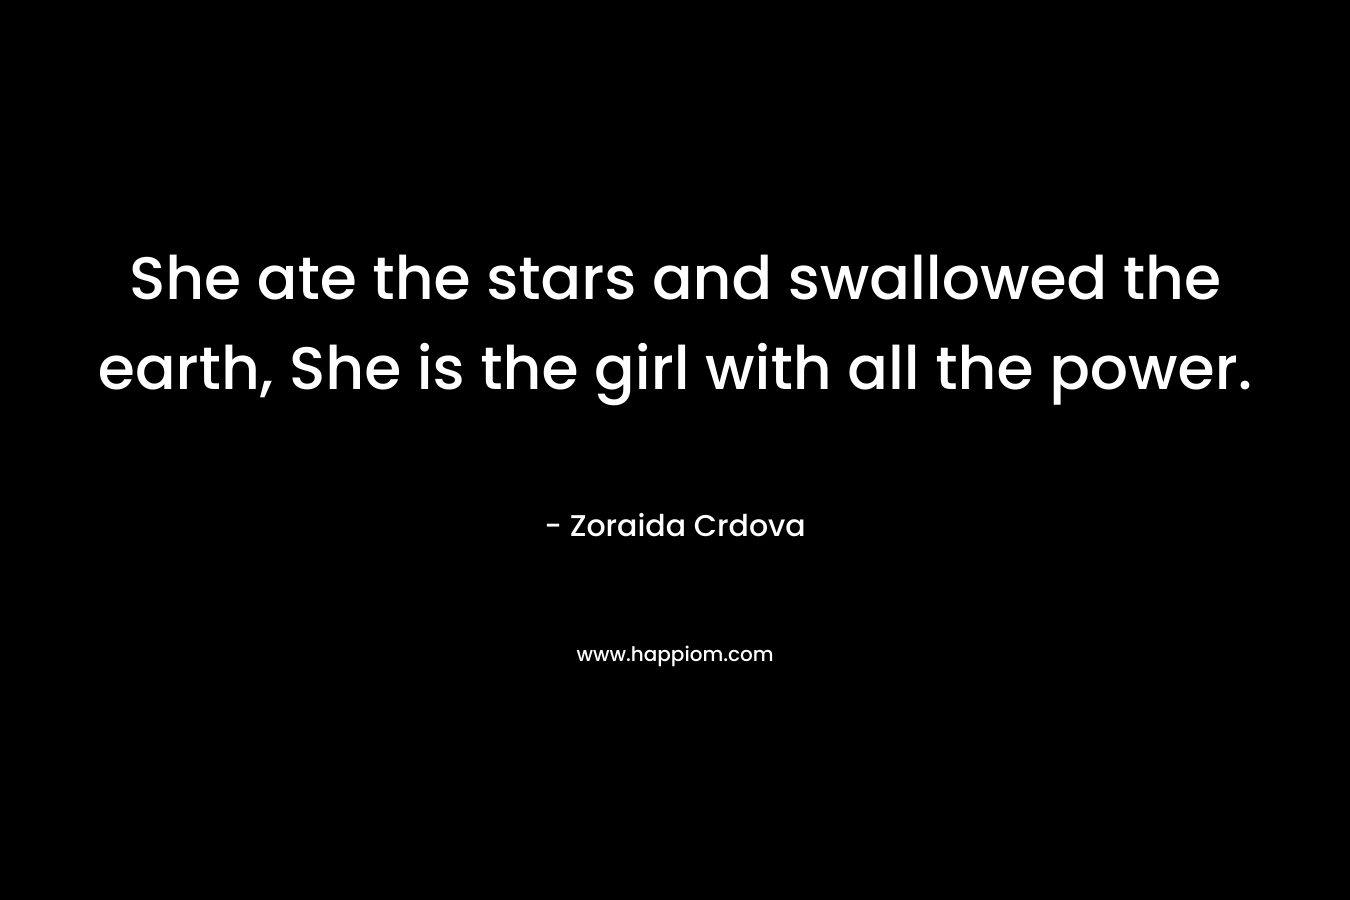 She ate the stars and swallowed the earth, She is the girl with all the power.